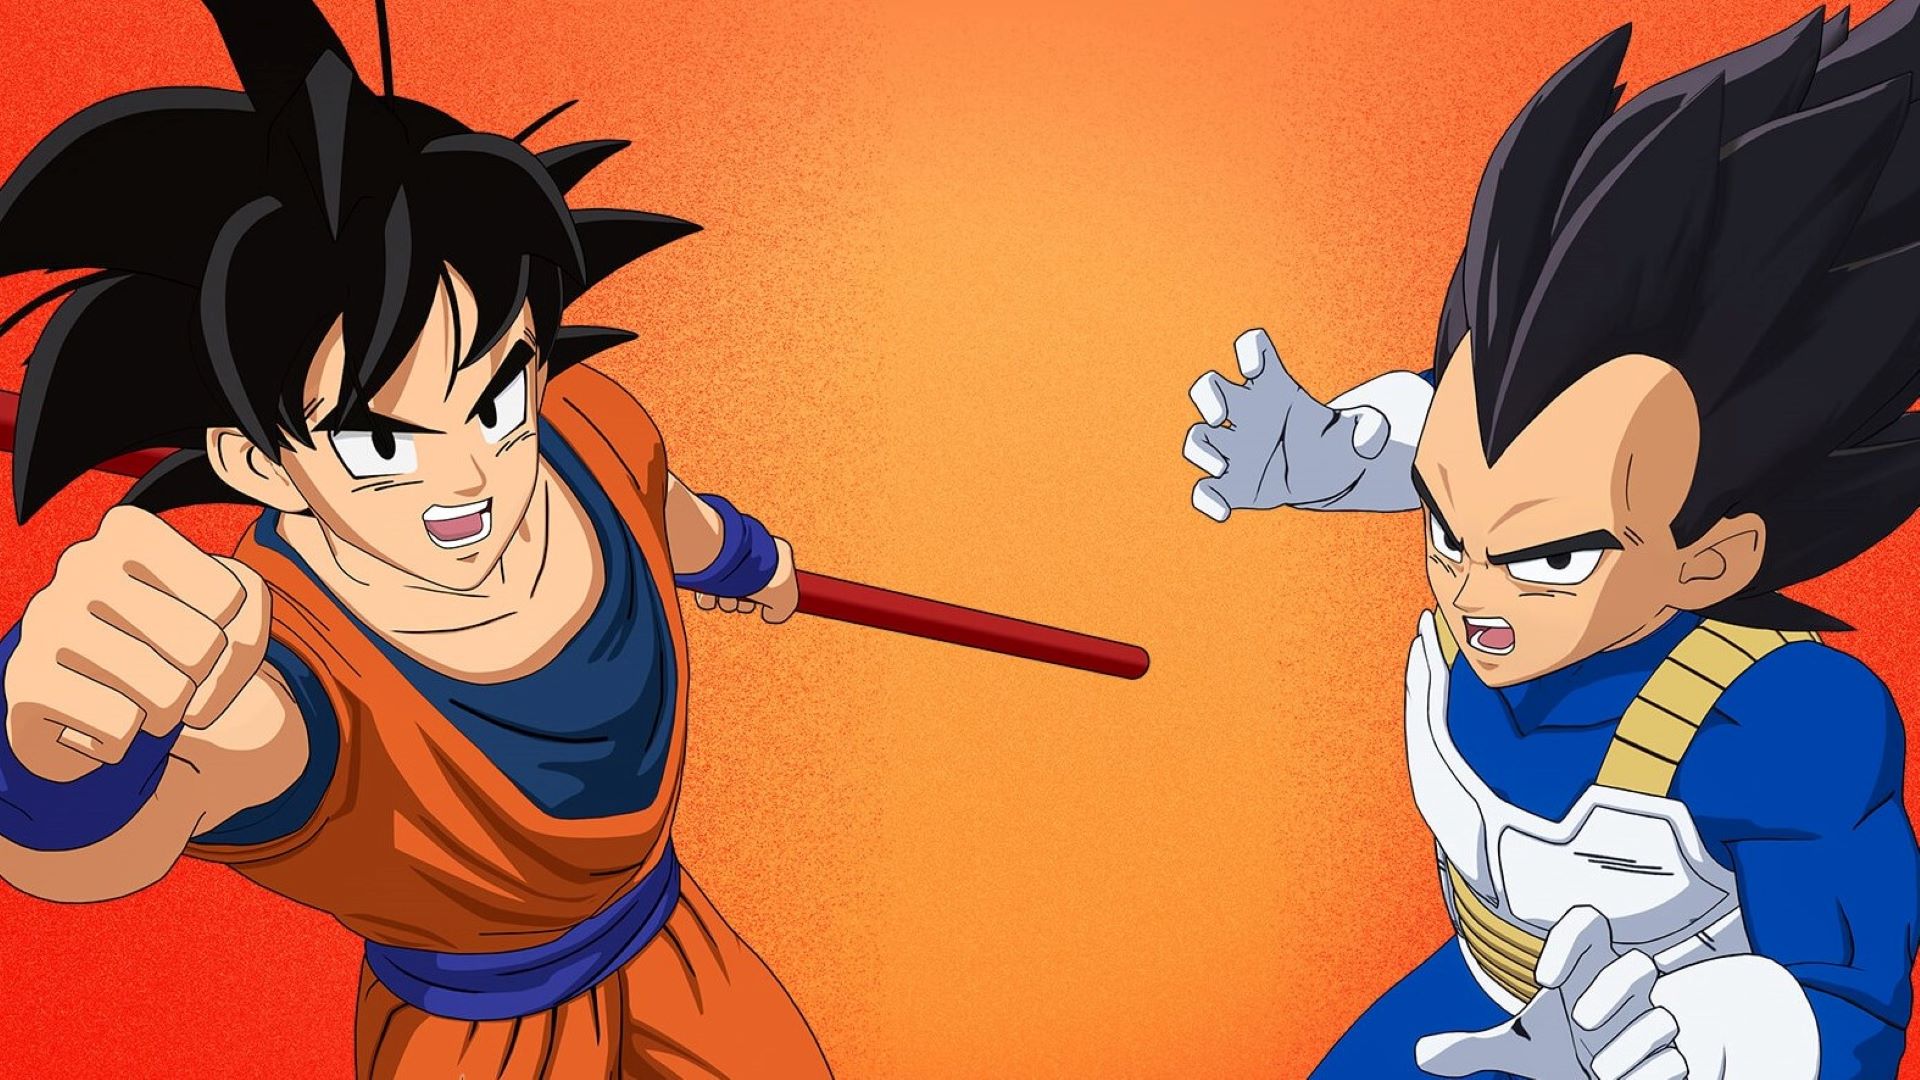 Fortnite Dragon Ball crossover has a power level of over 9,000